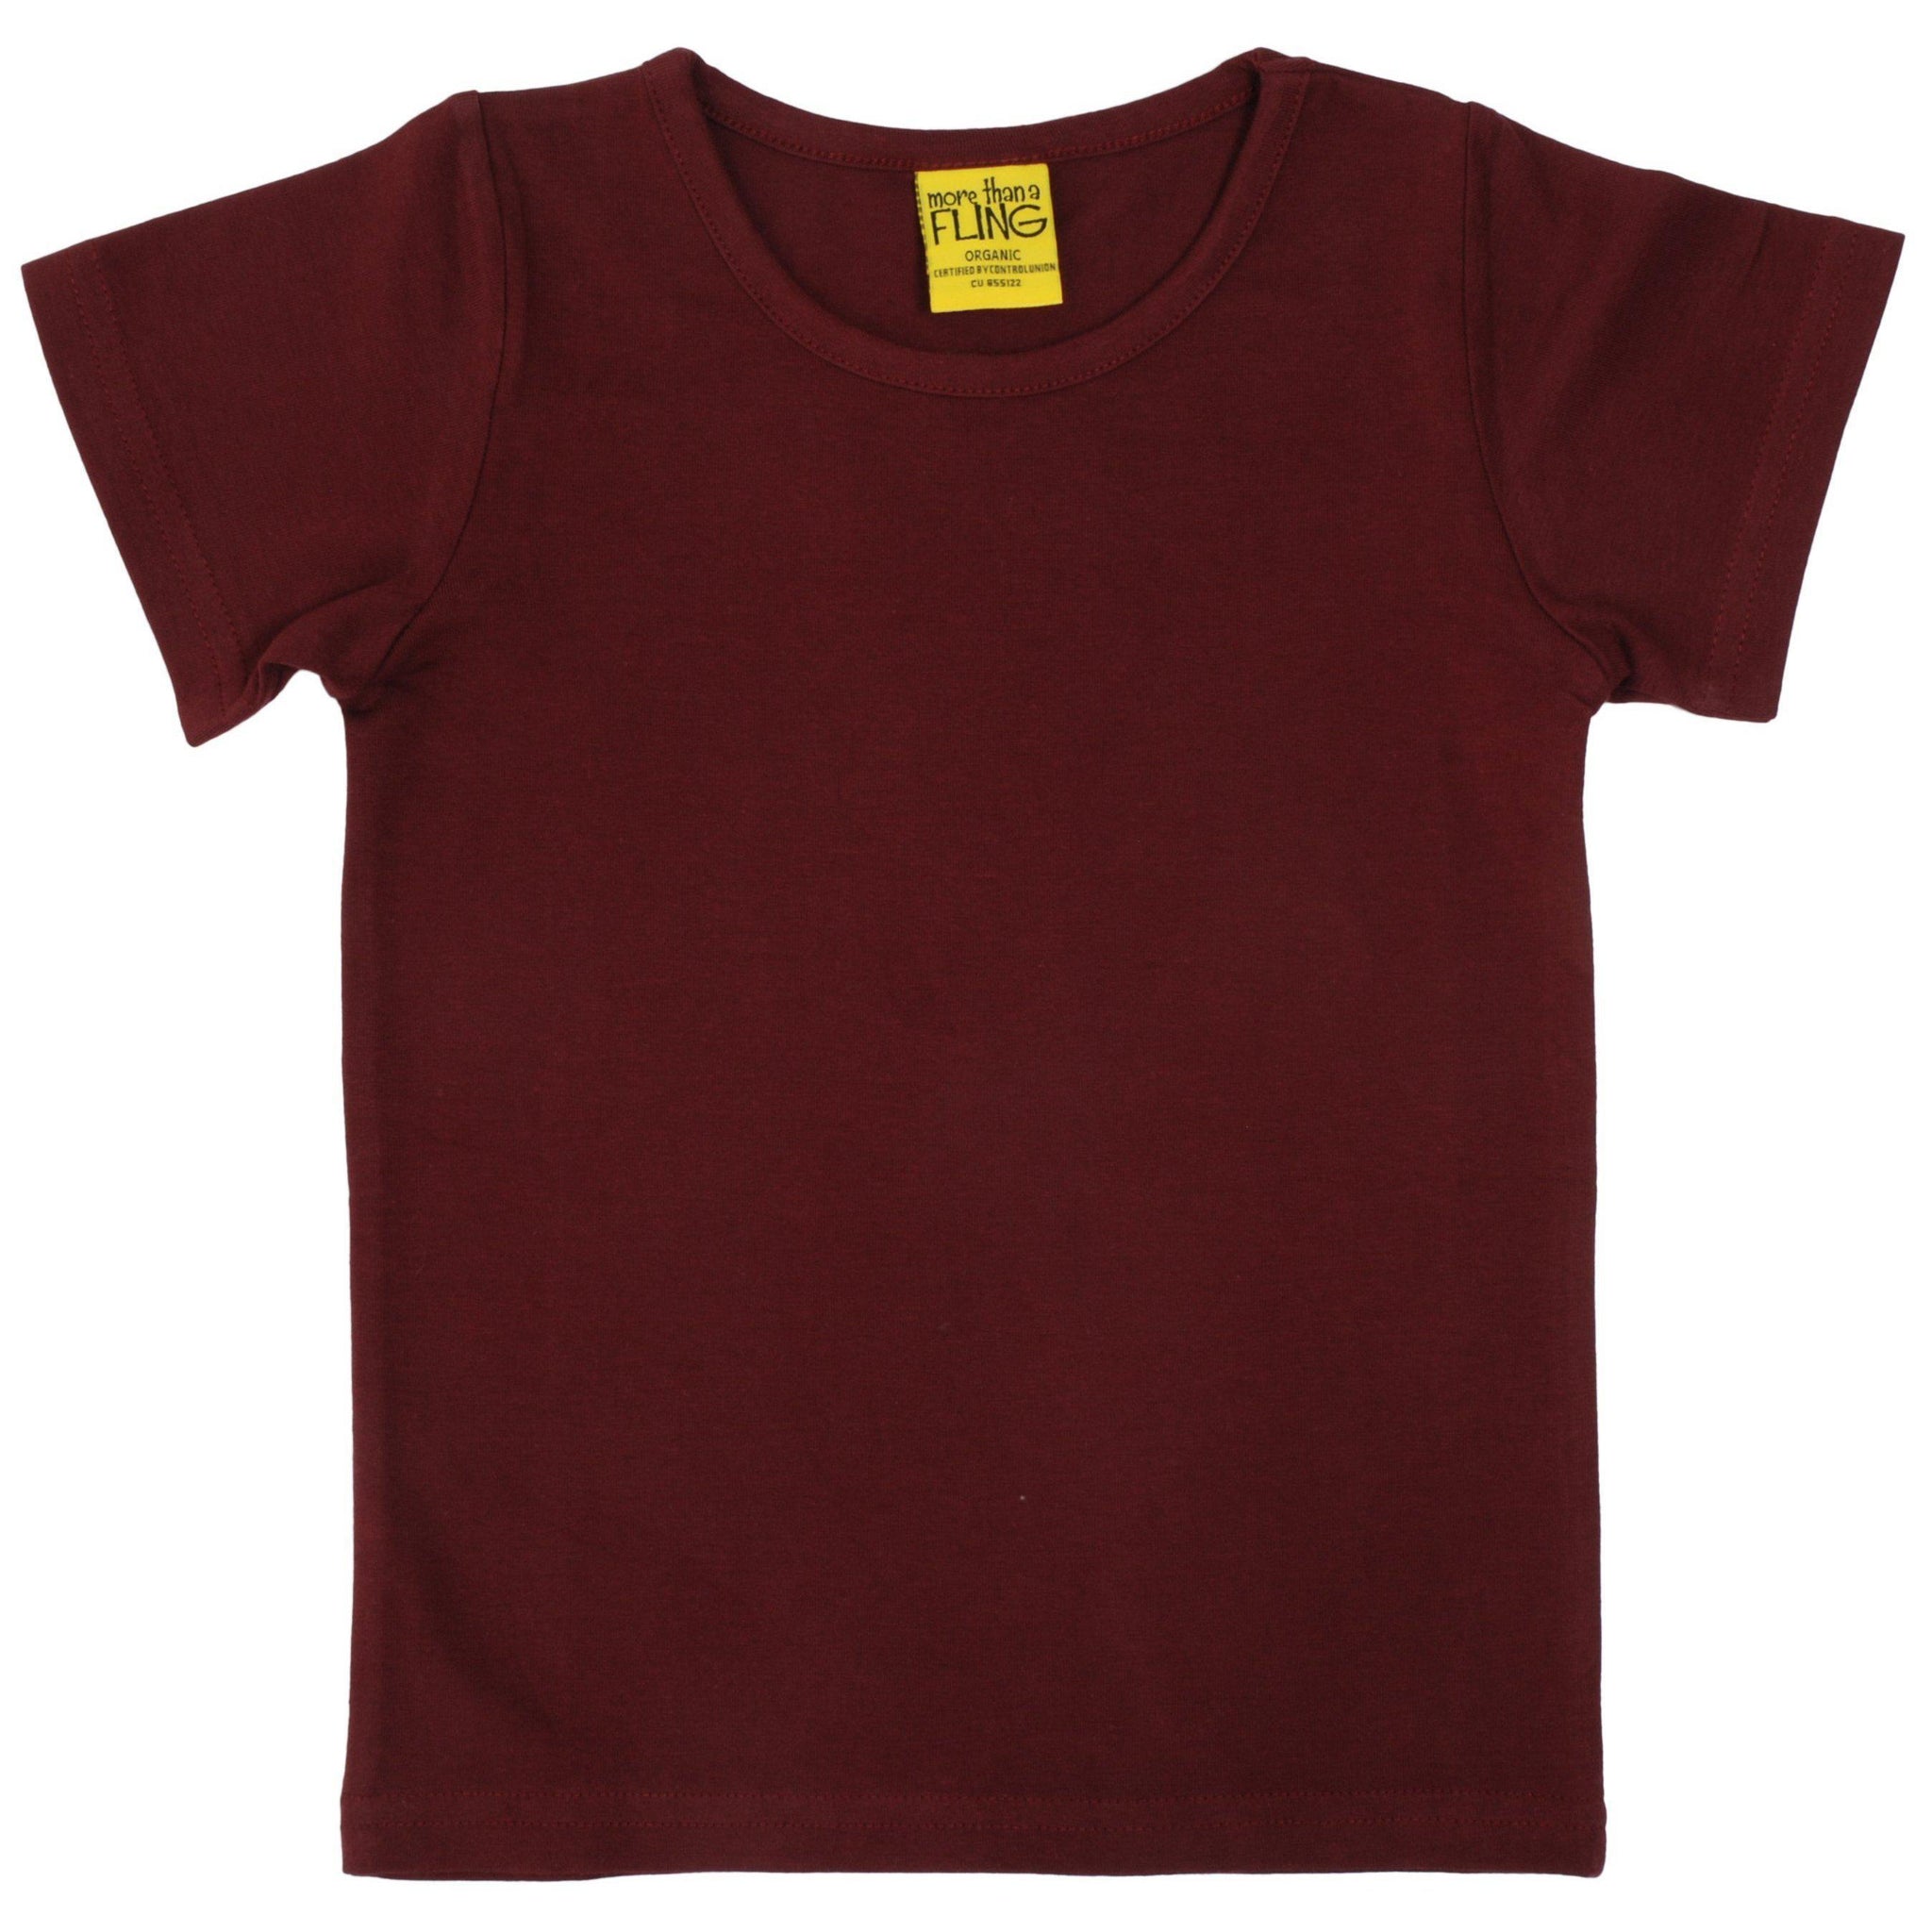 More than a Fling - Wine Short Sleeved Top